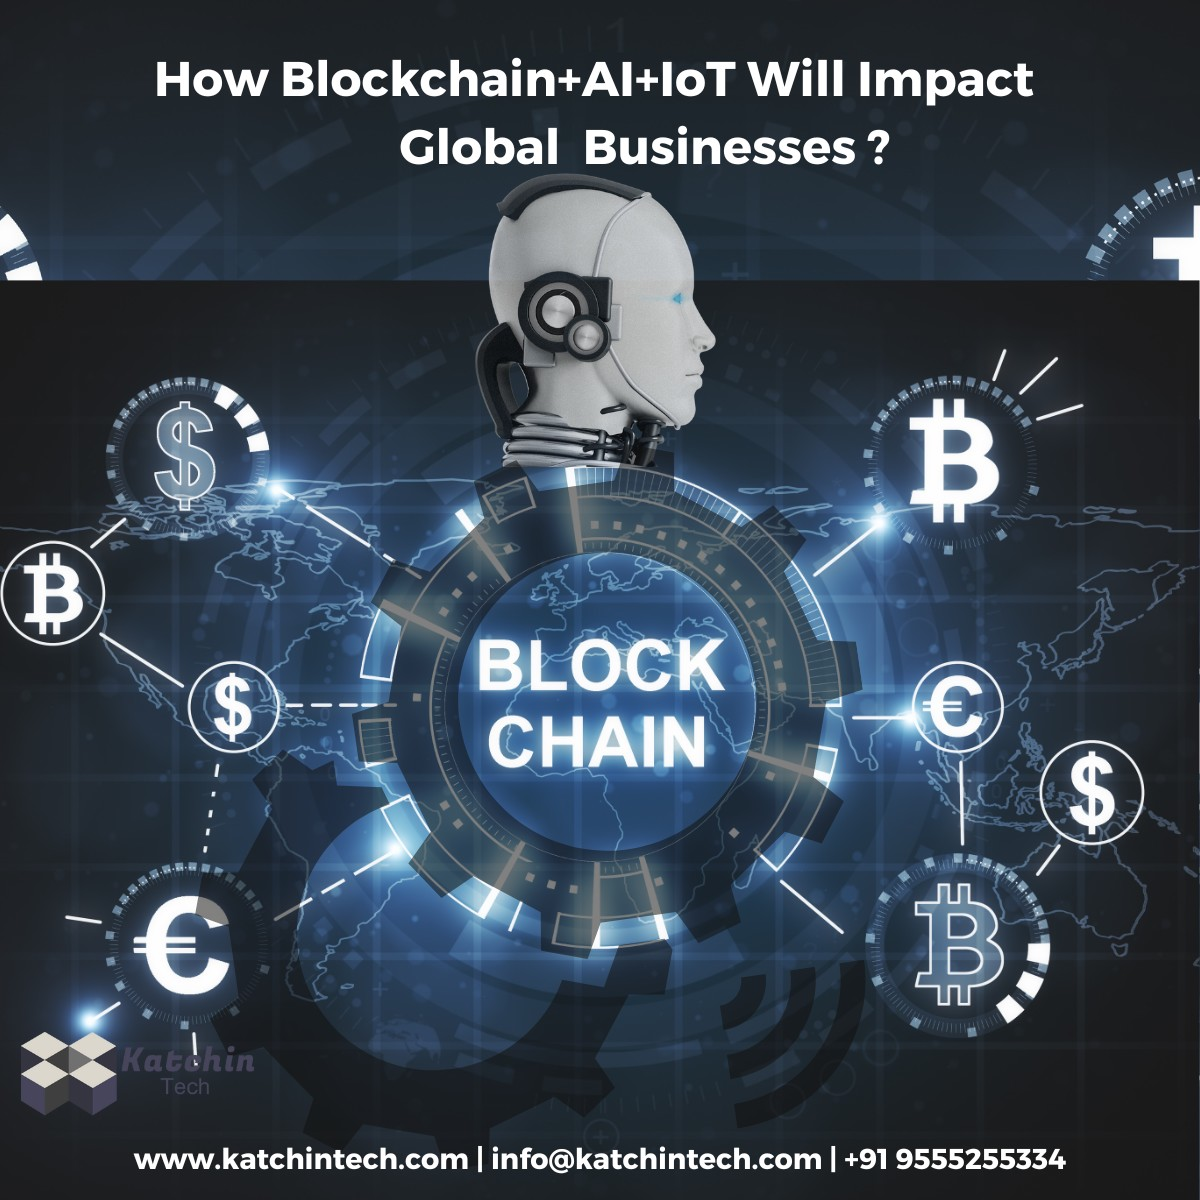 How will Blockchain+AI+IoT impact global businesses?